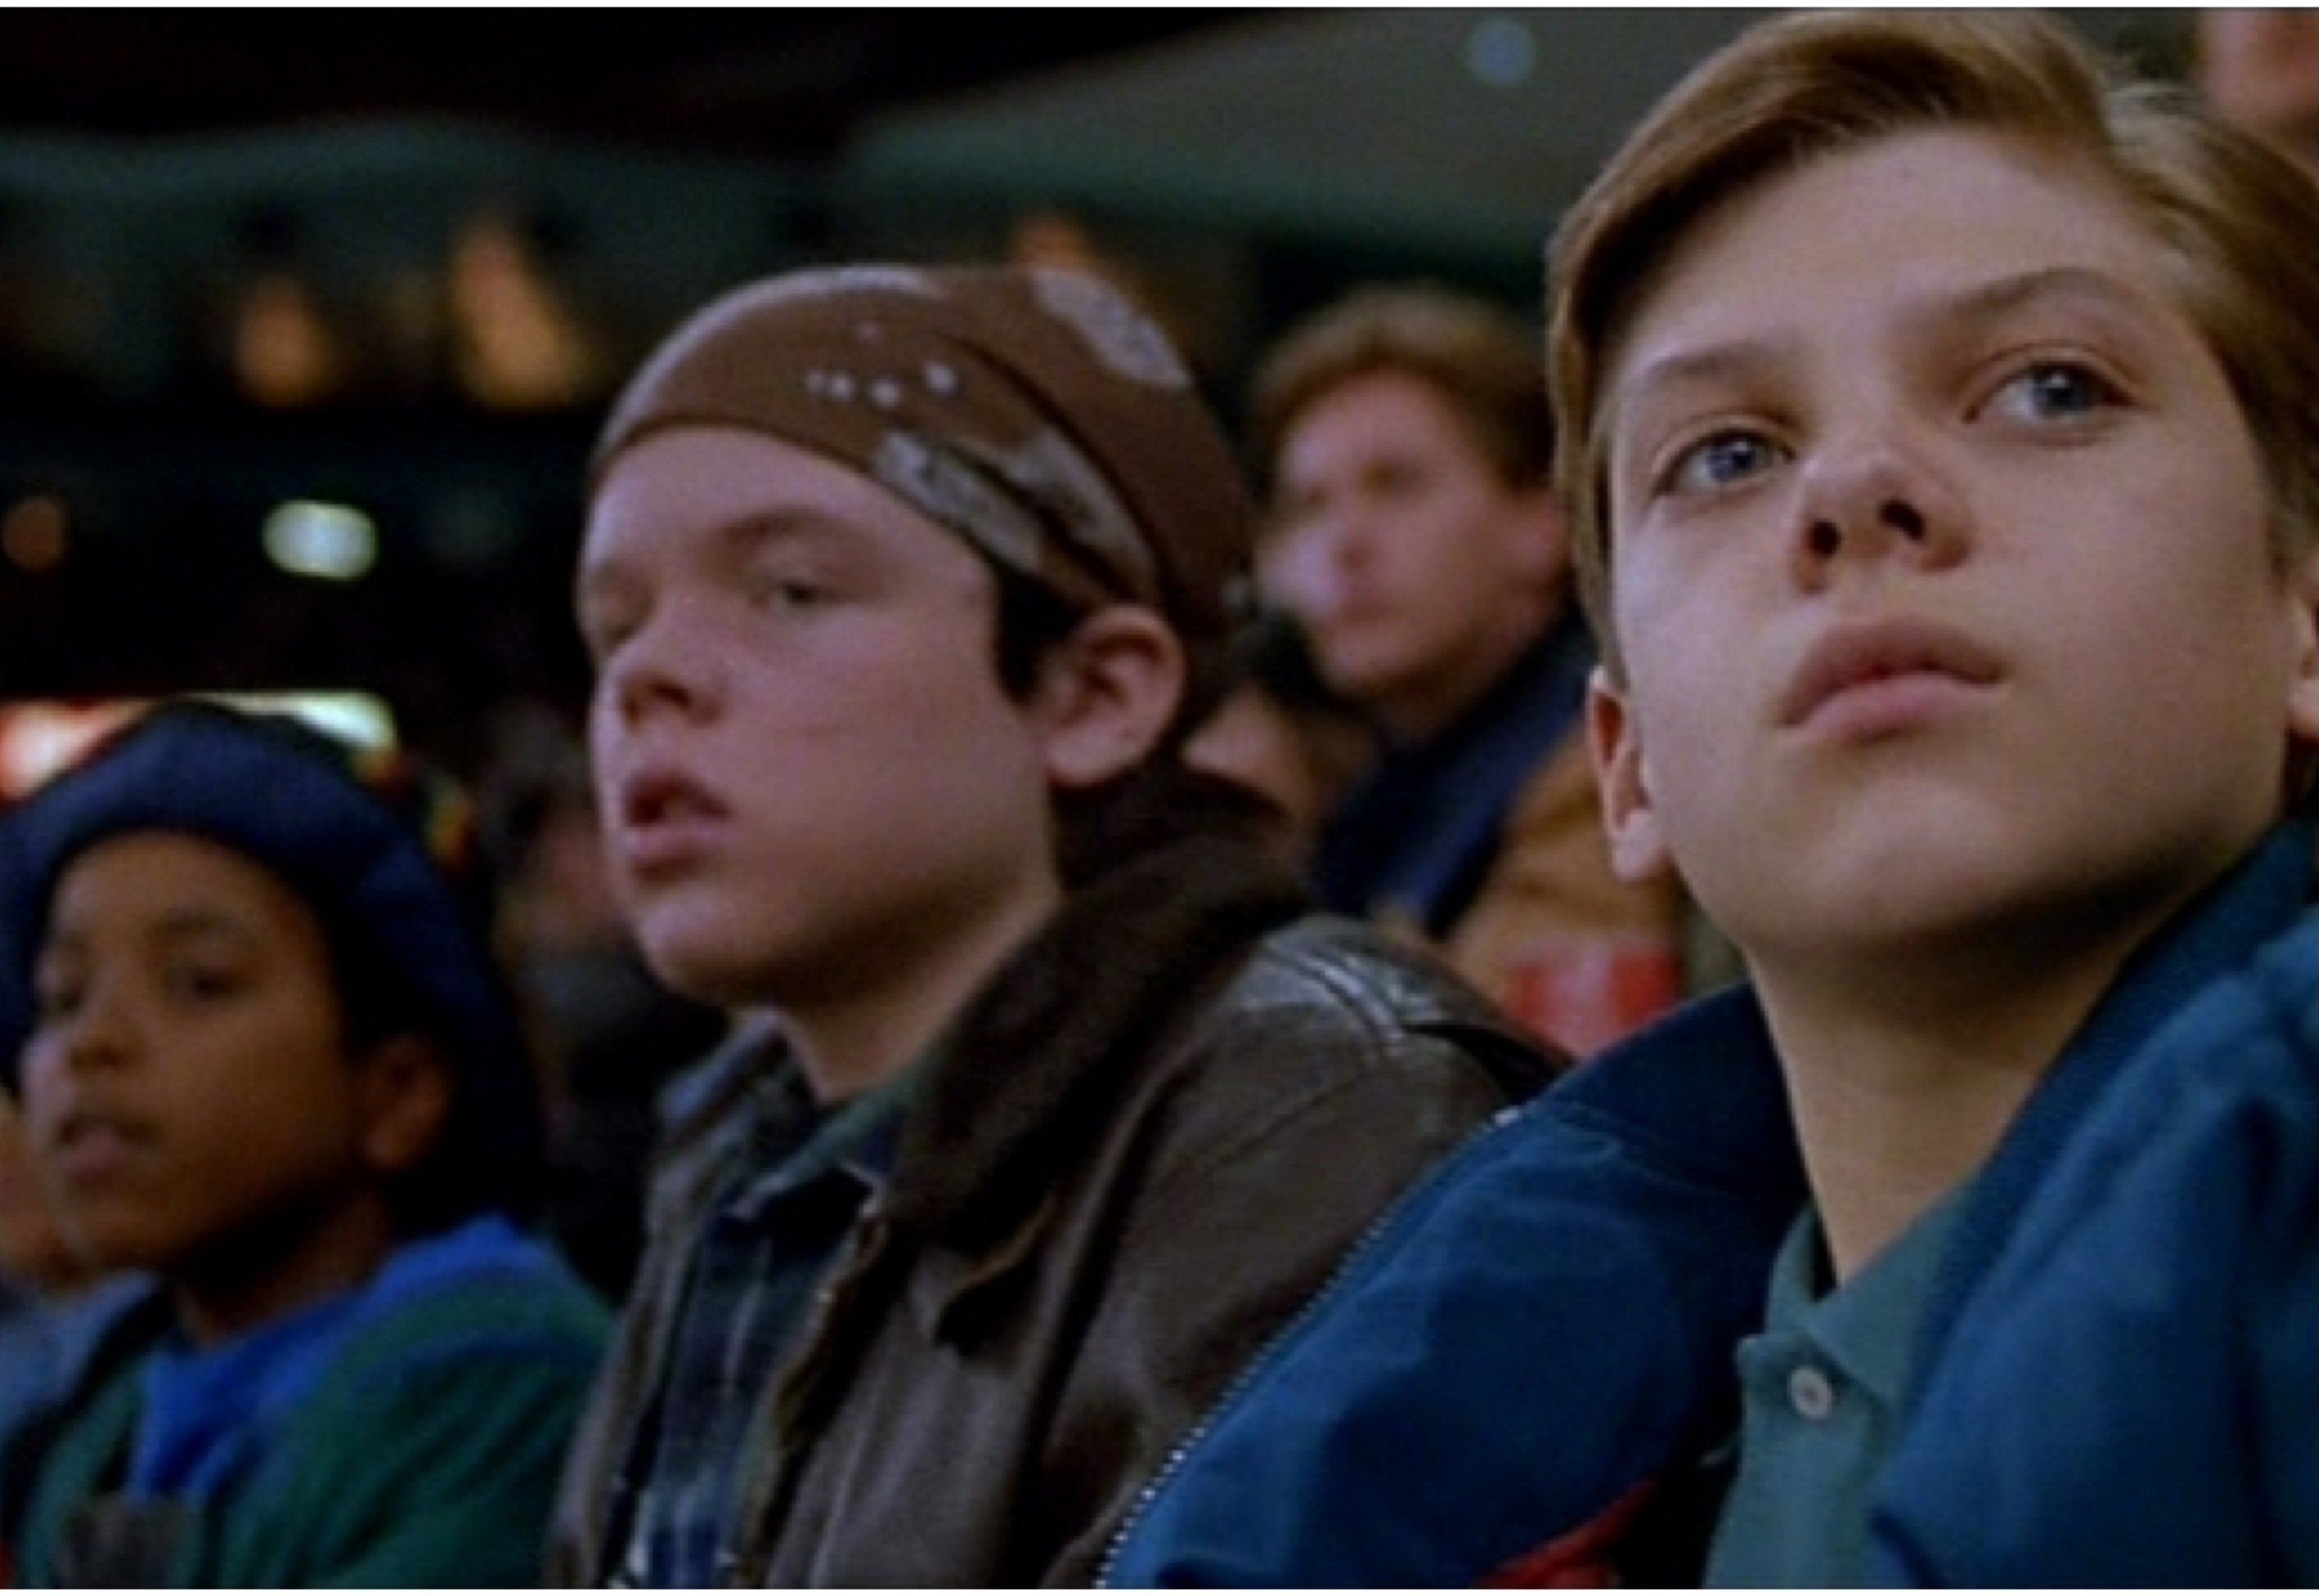 Looking at the Mighty Ducks movies through Adam Banks' eyes